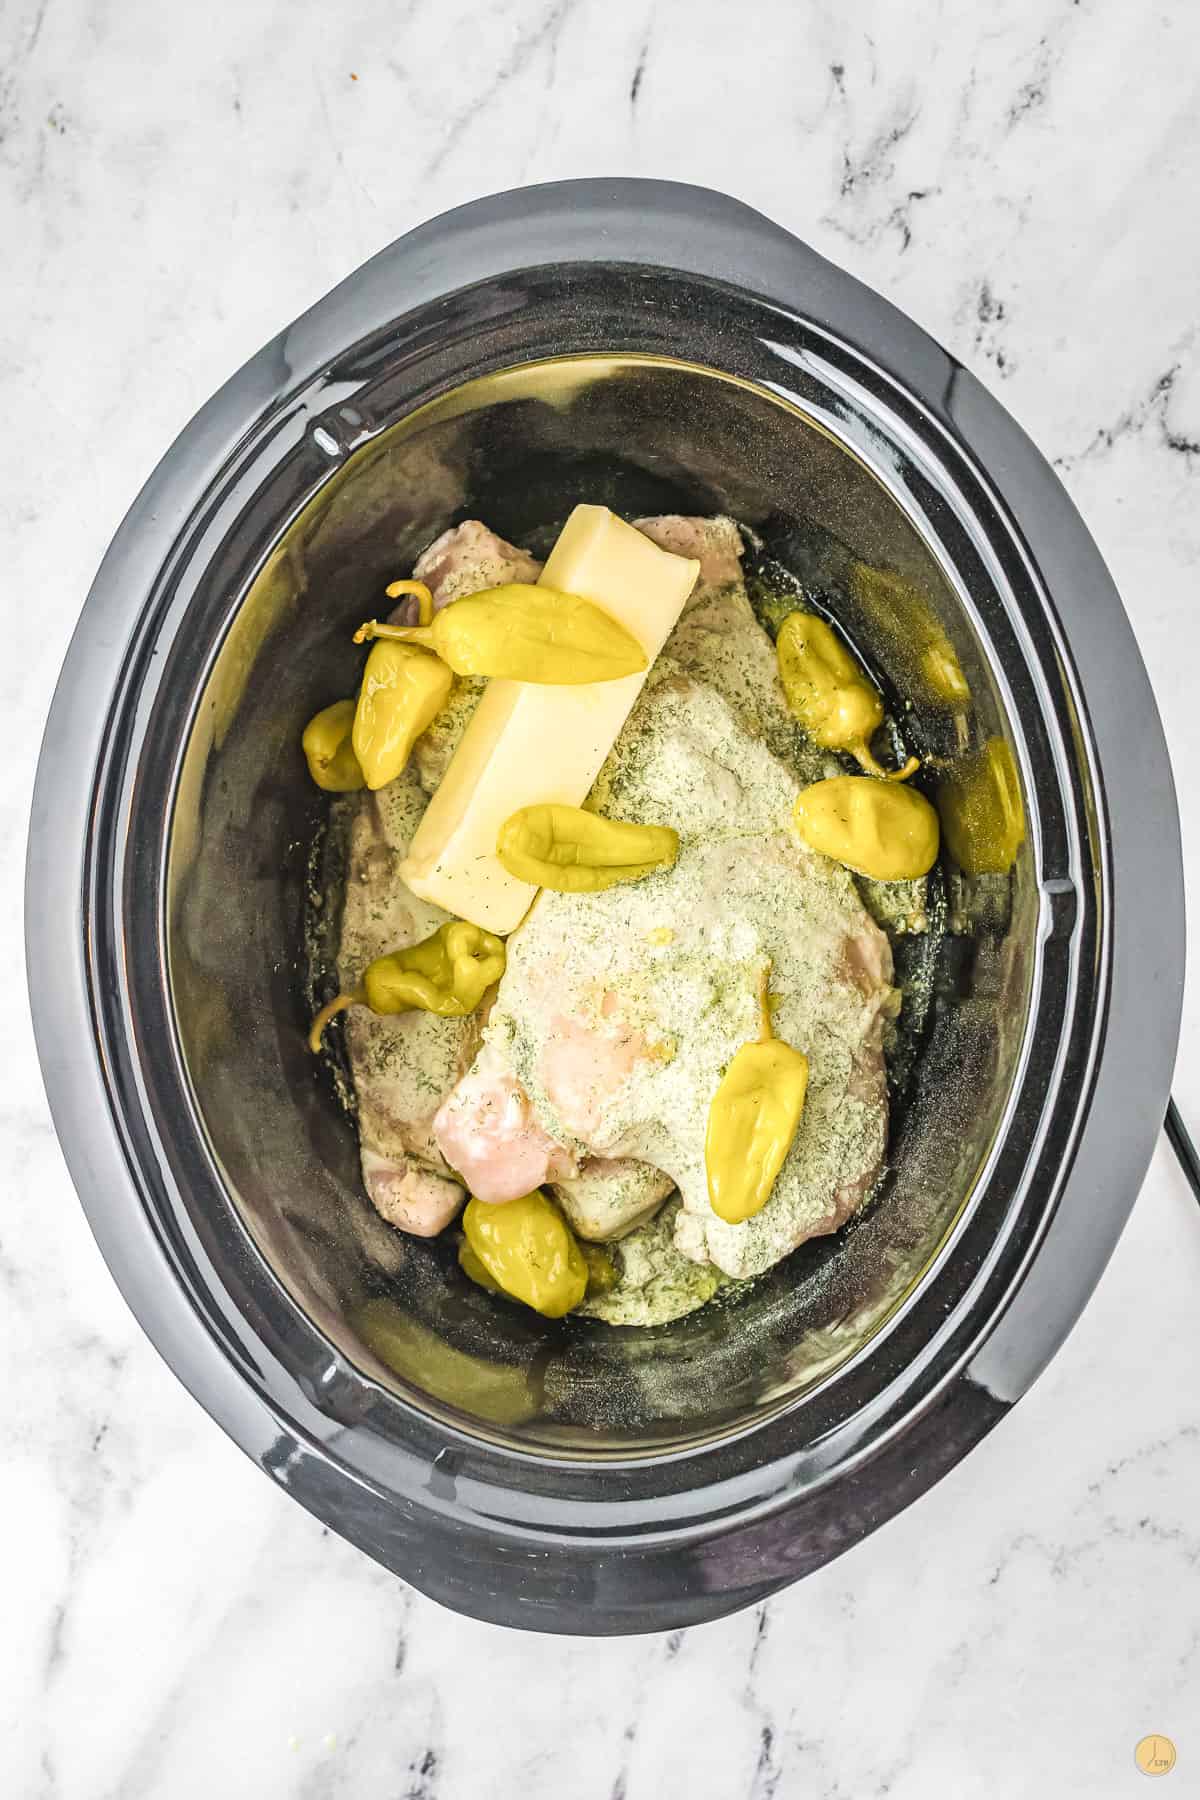 butter and peppers in a slow cooker